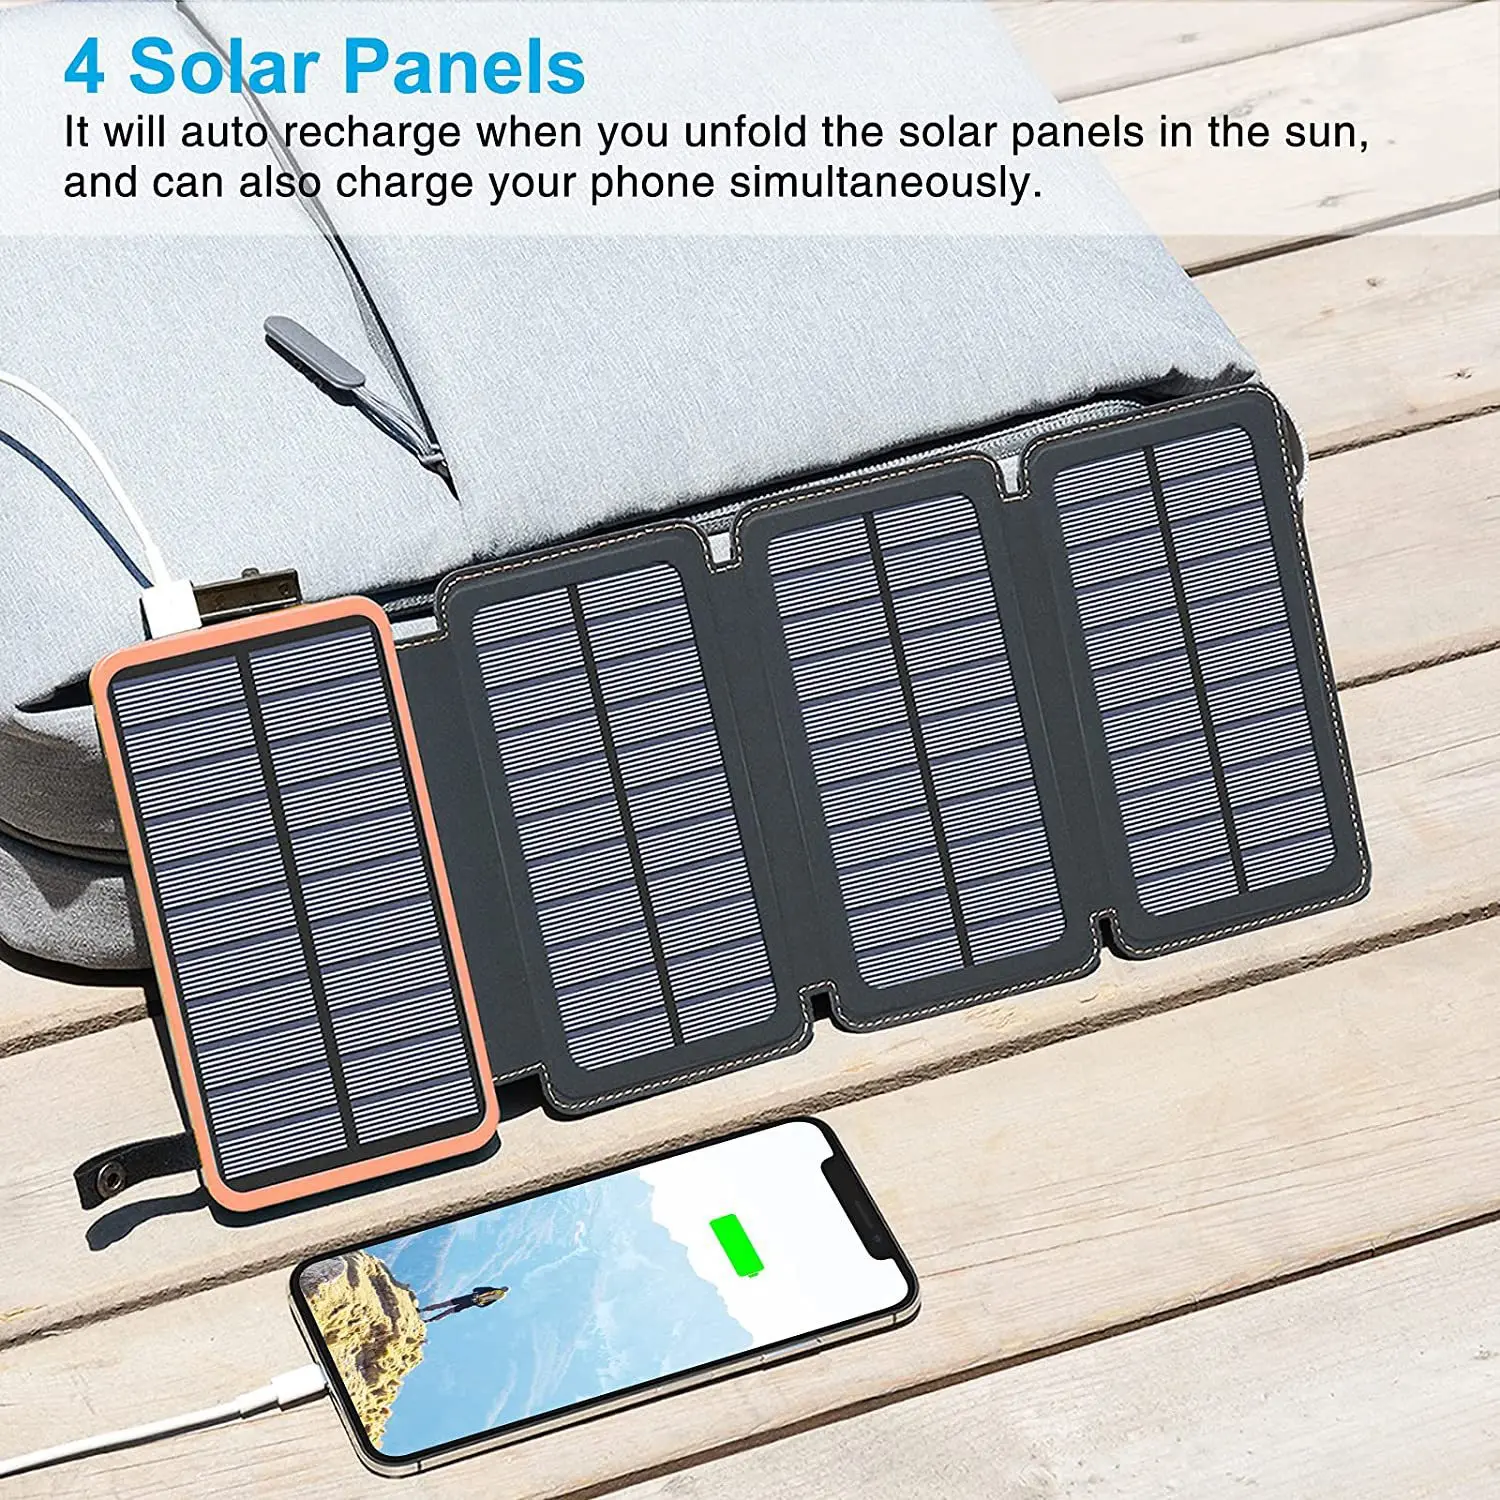 16000mAh Waterproof Solar Power Bank Outdoor Camping Portable Folding Solar Panels 5V 2A USB Output Device Sun Power For Phone